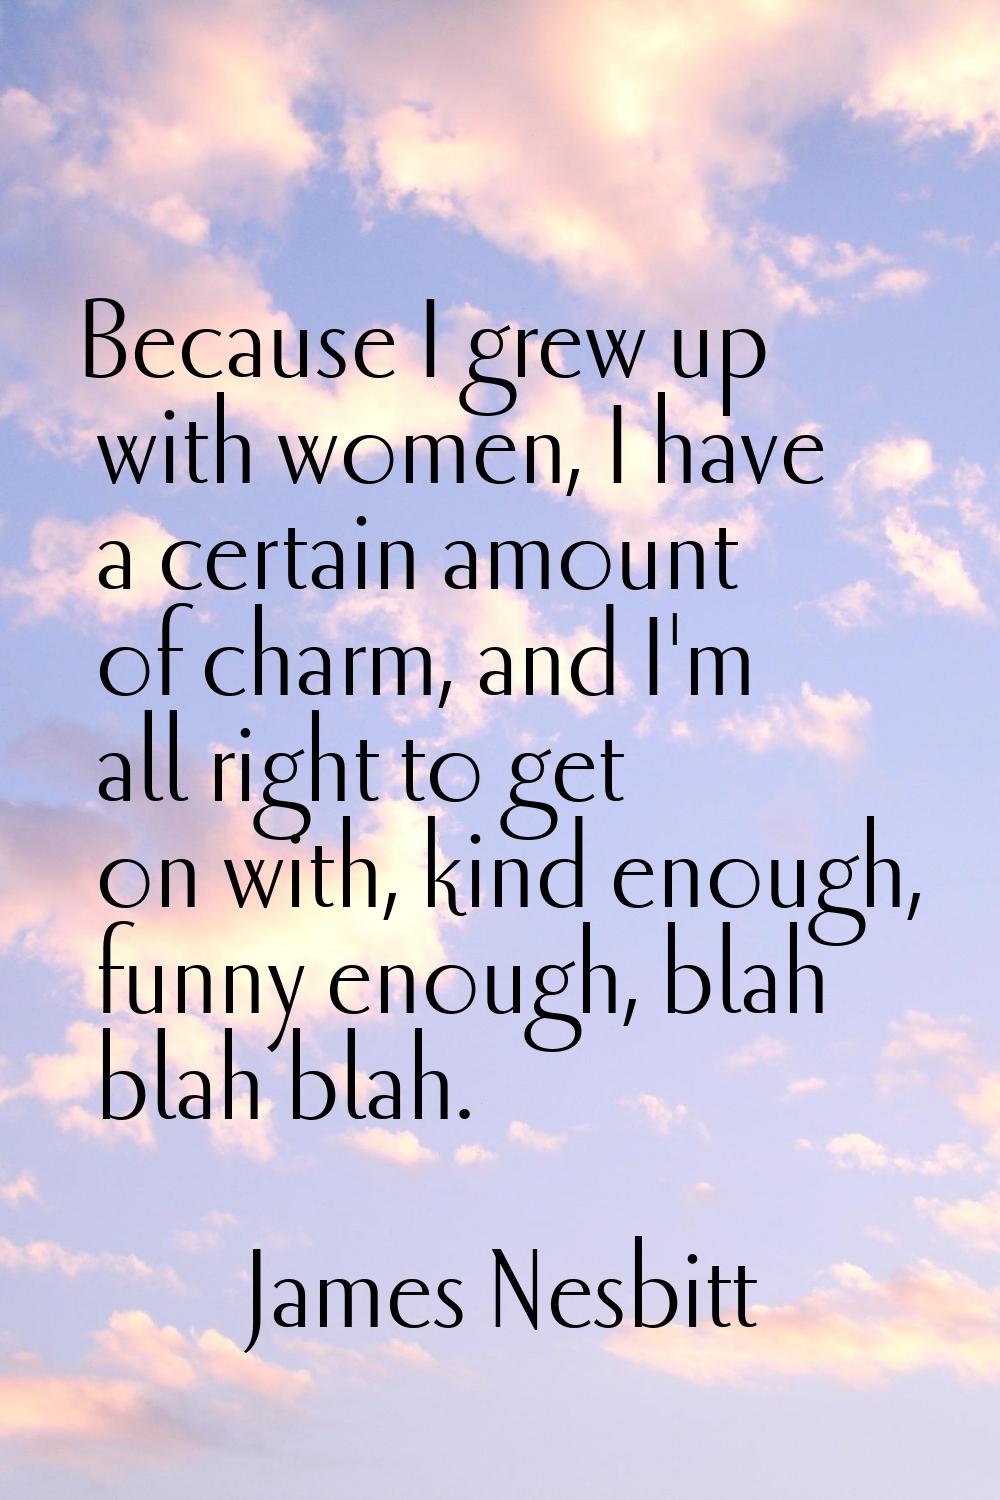 Because I grew up with women, I have a certain amount of charm, and I'm all right to get on with, k